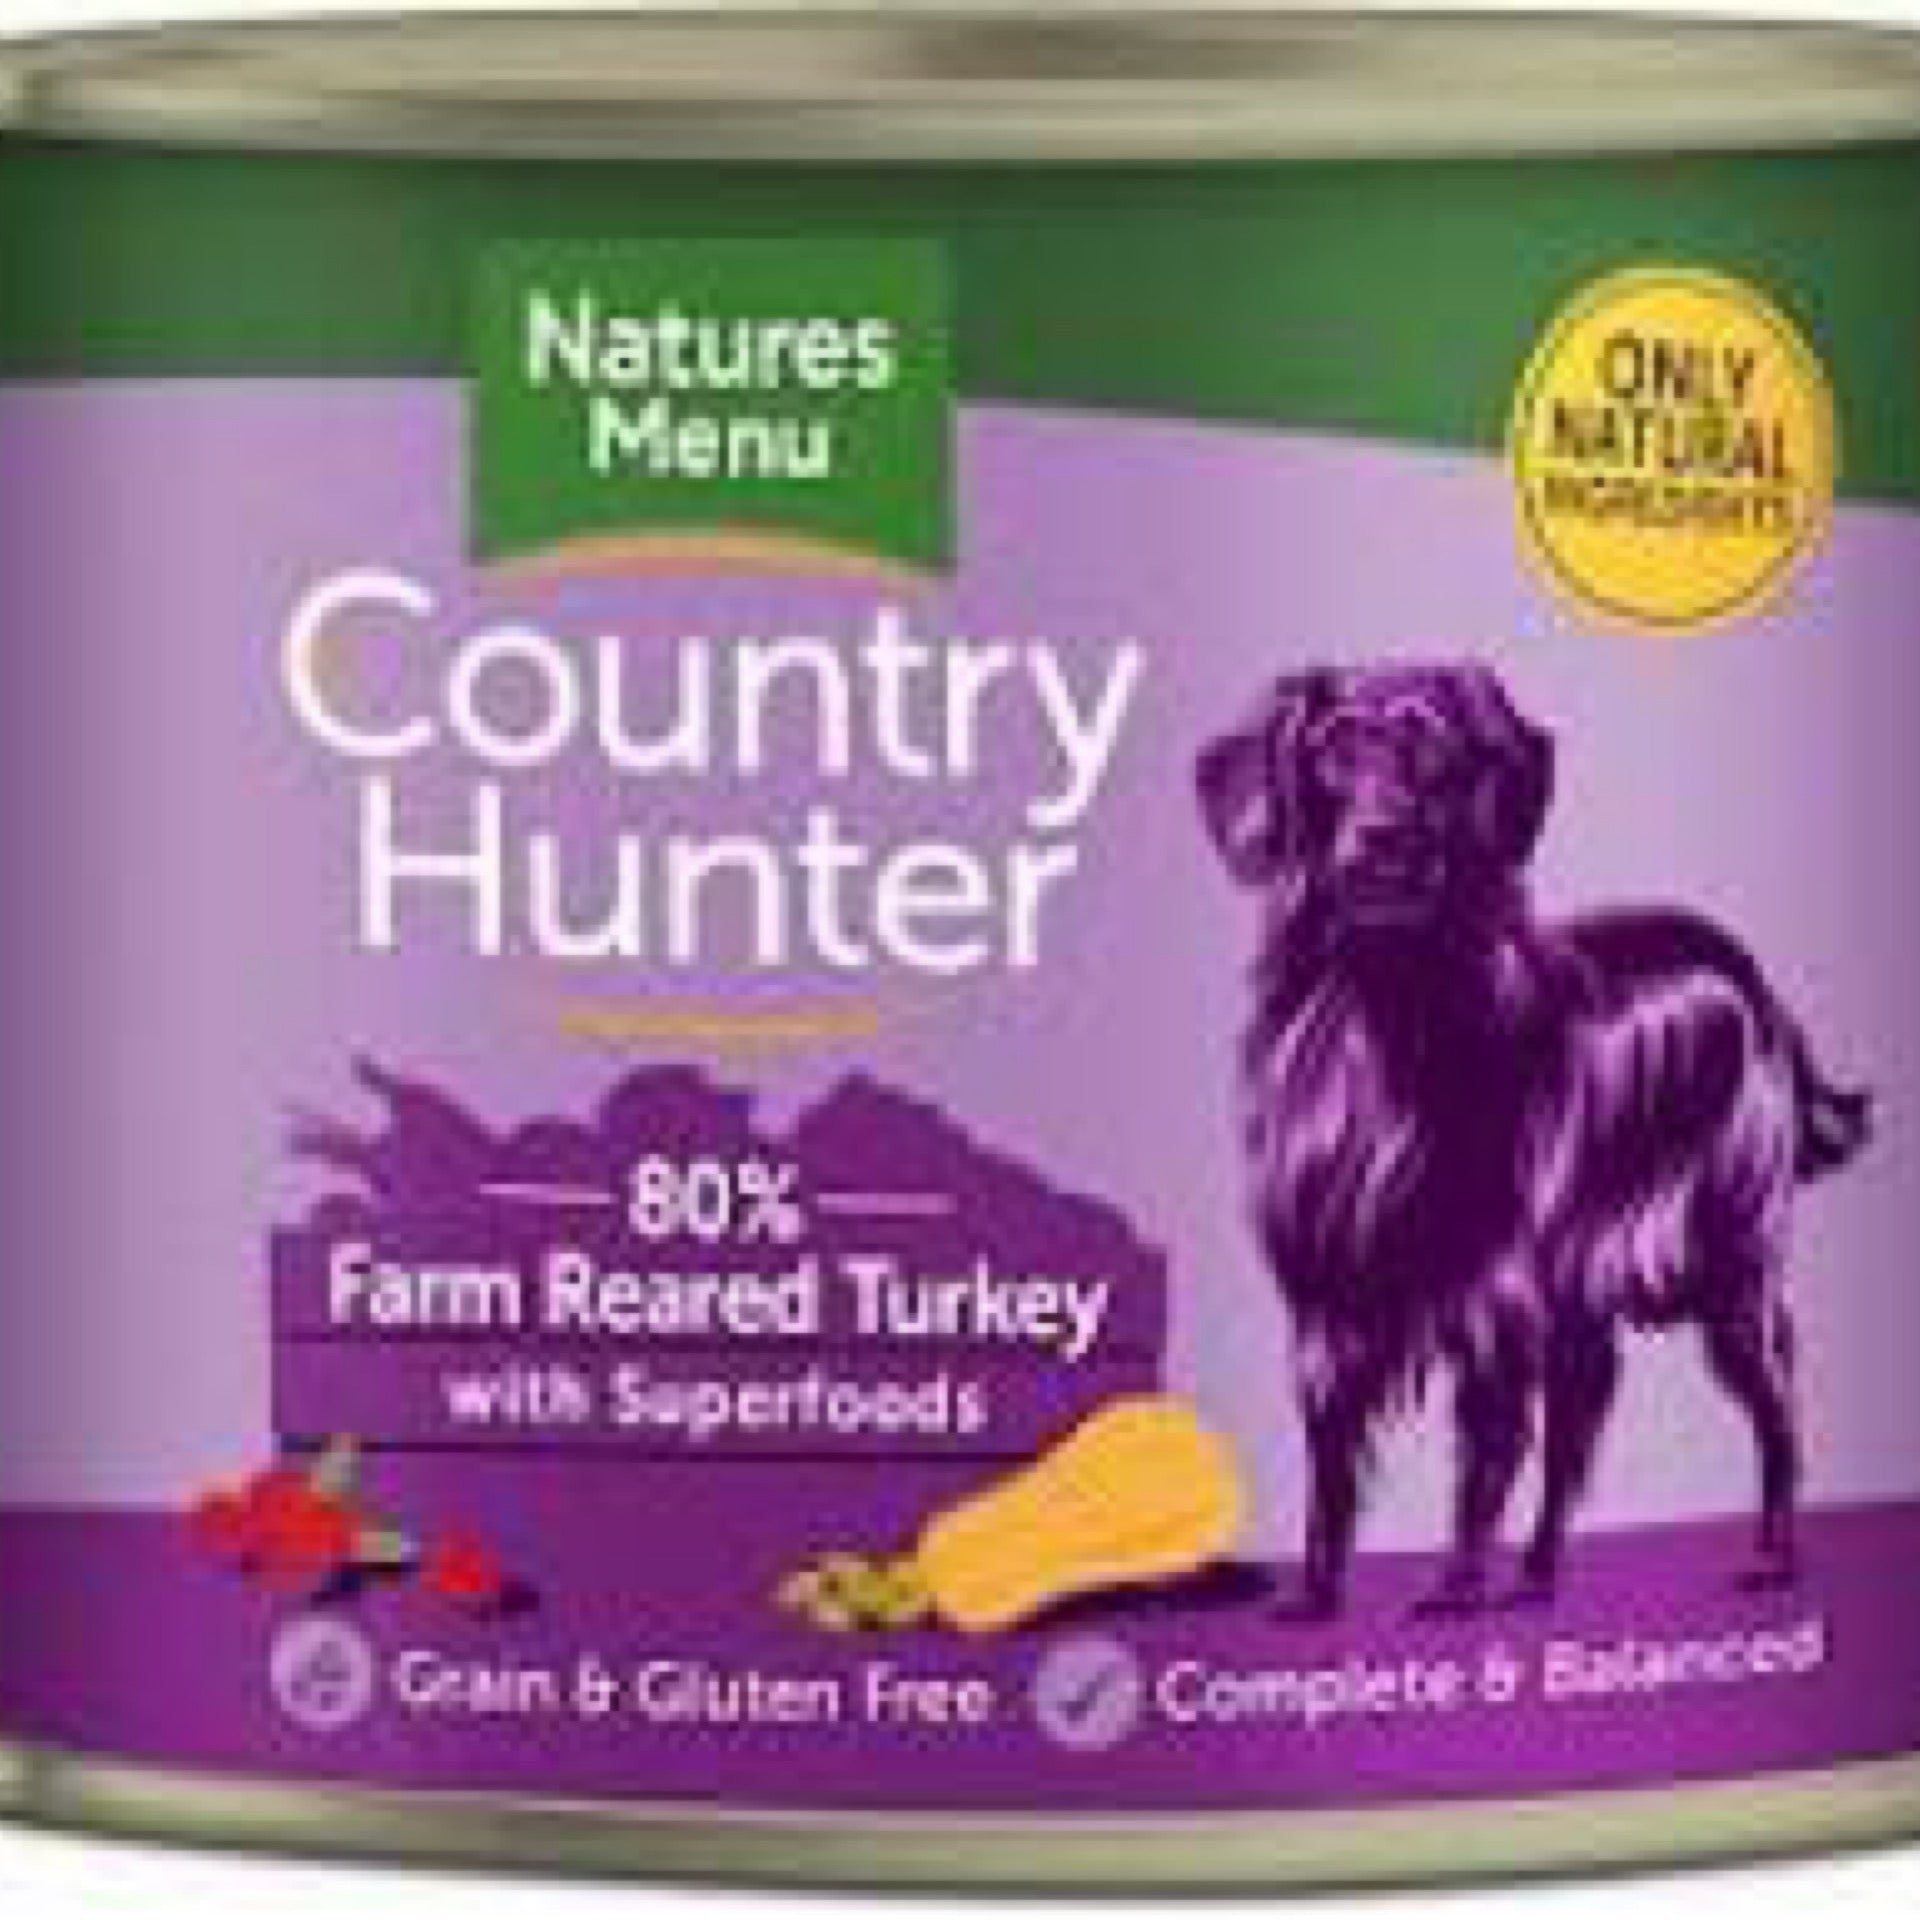 Natures Menu Country Hunter Turkey with Superfoods 600g